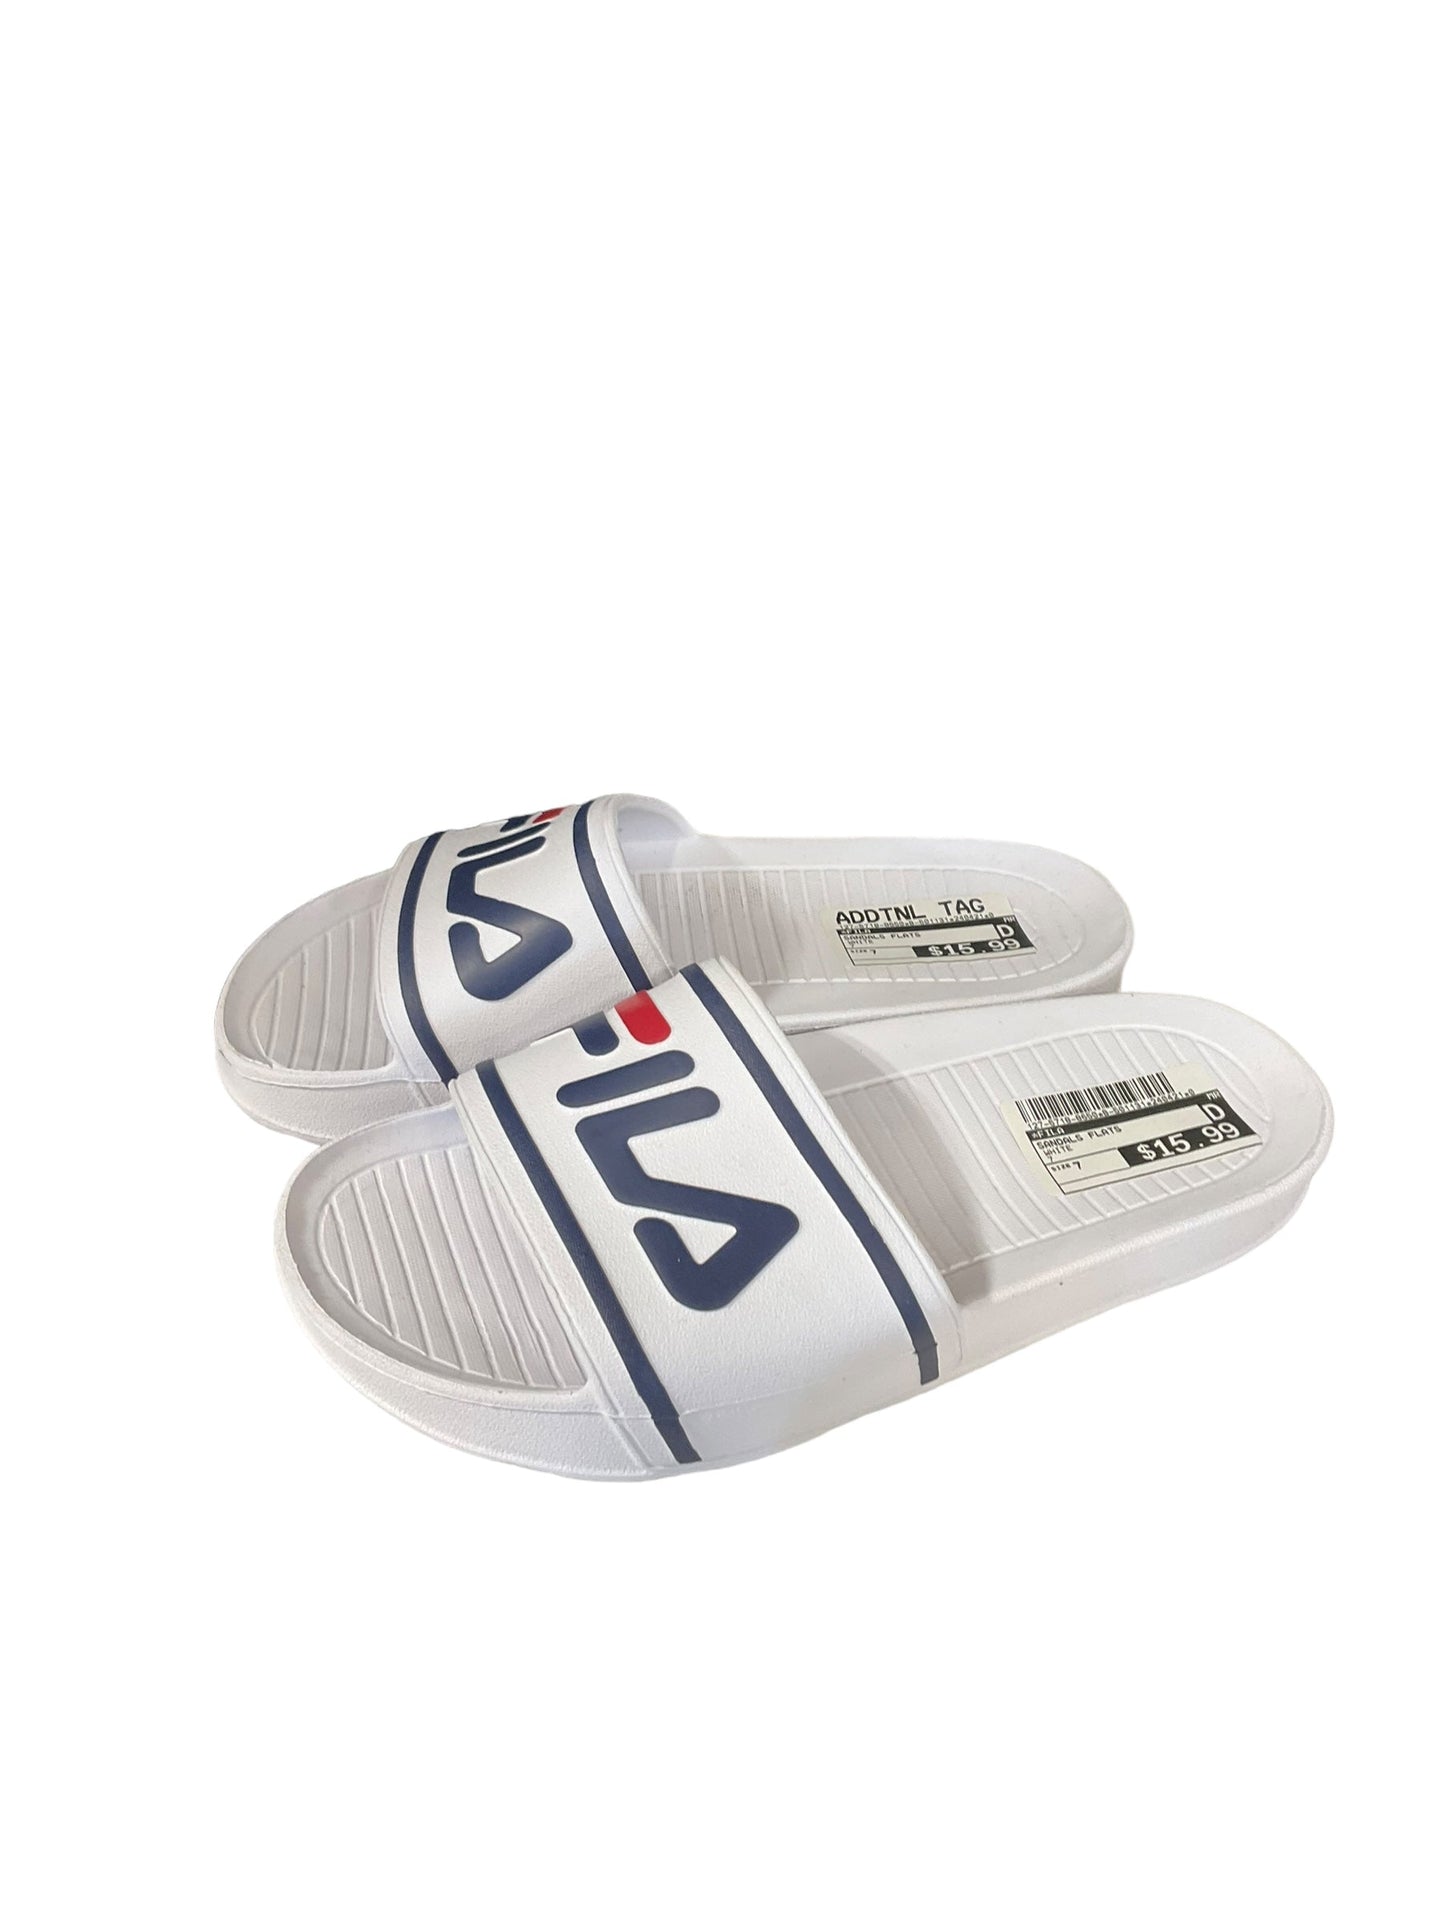 Sandals Flats By Fila  Size: 7